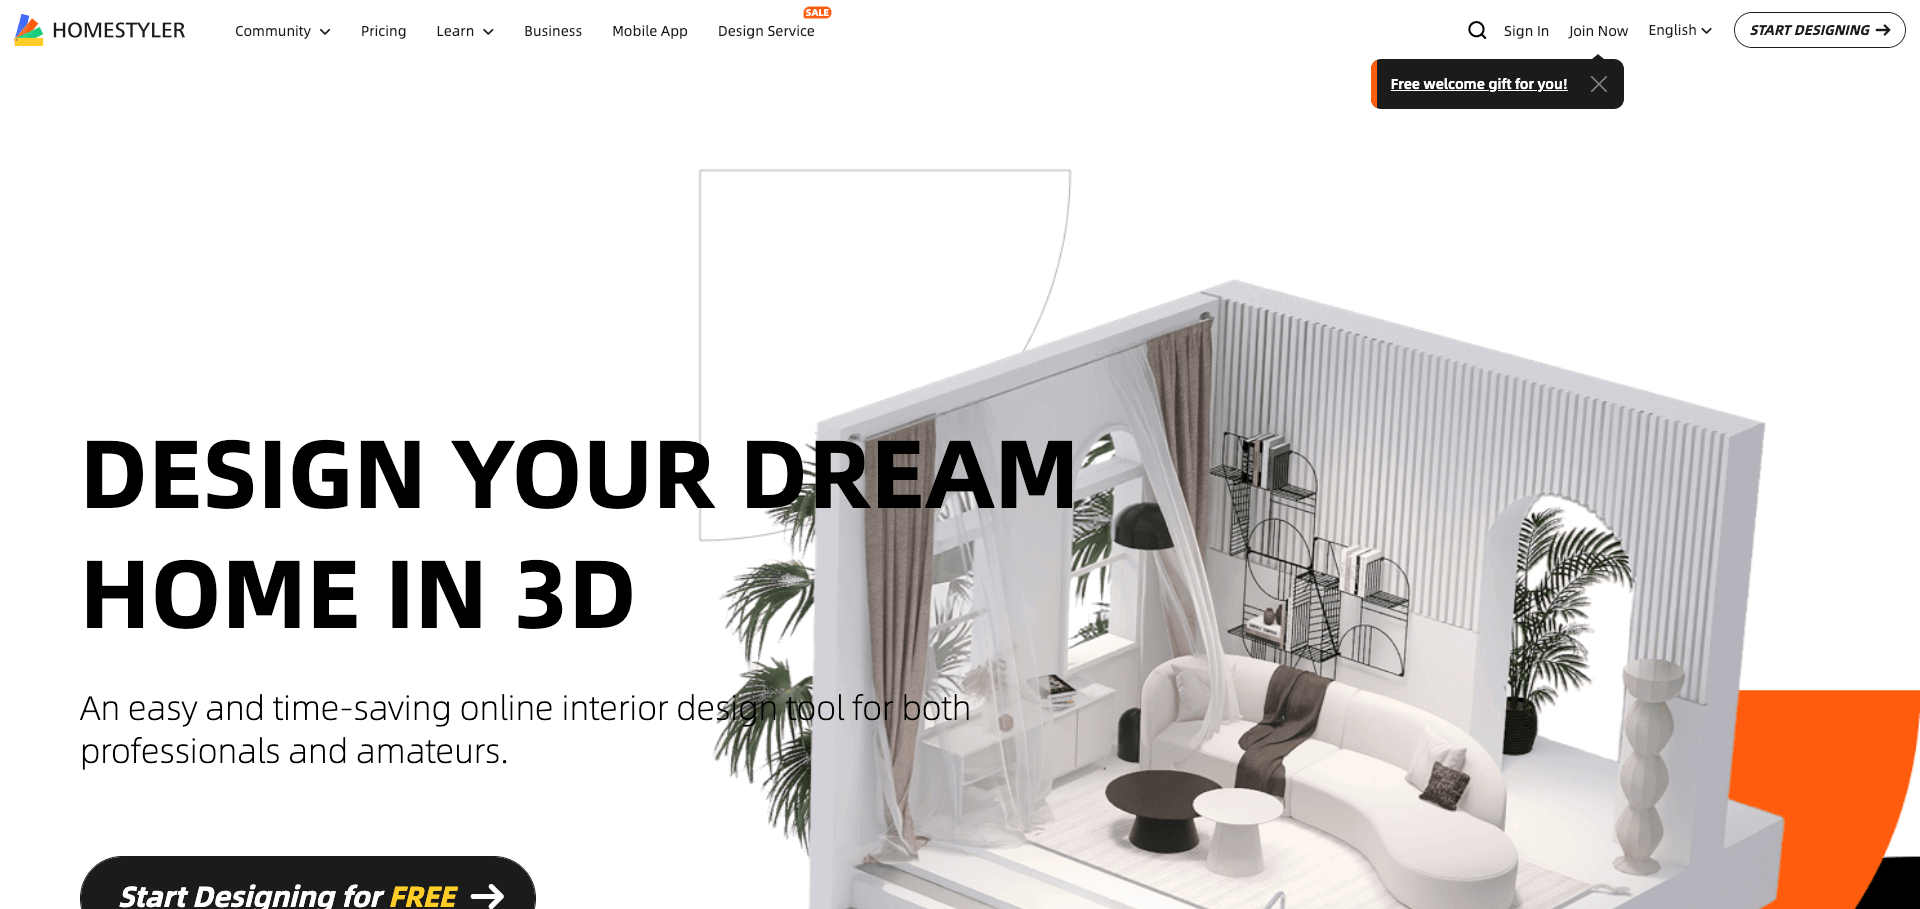 Easyhome Homestyler: Design and customize beautiful home designs with Easyhome Homestyler in a 3D environment.